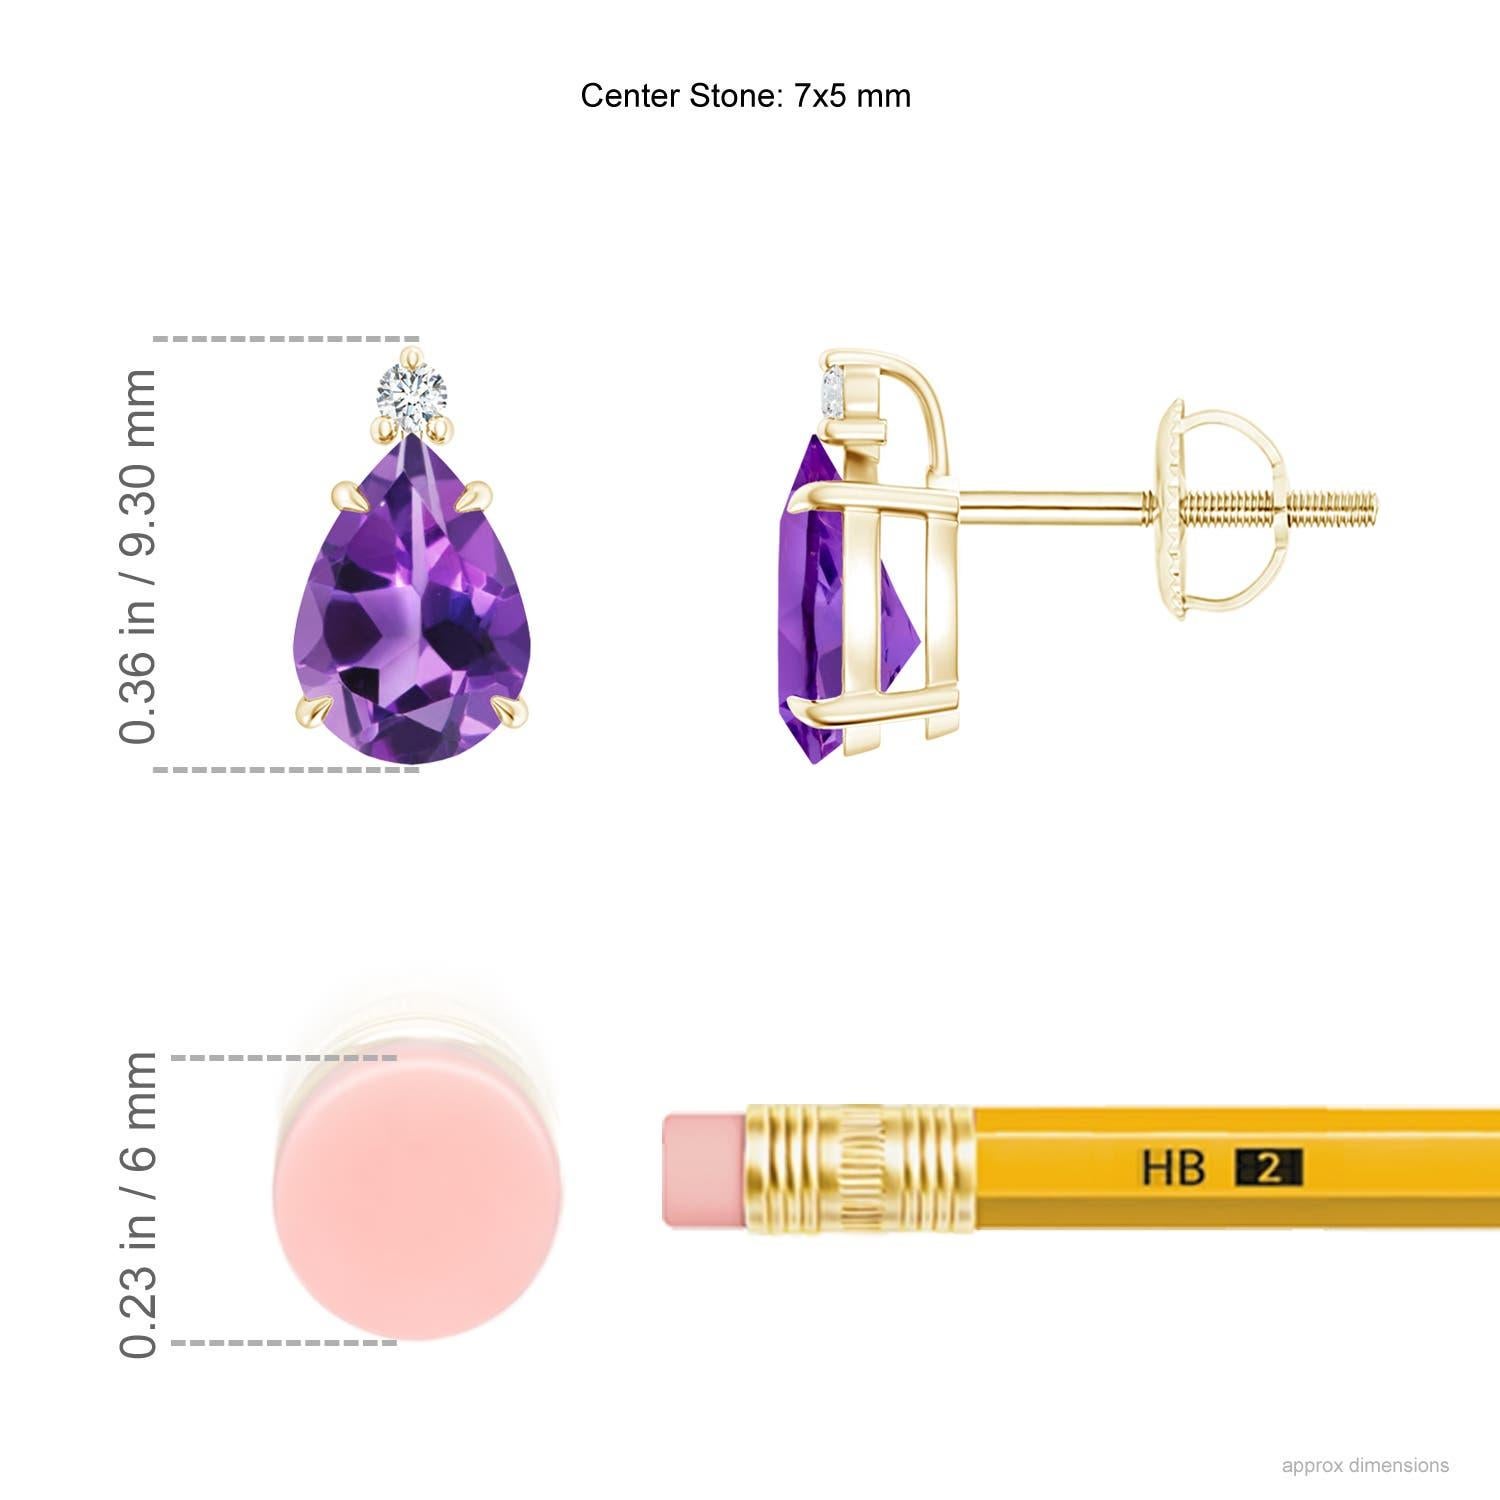 Inverted pear-shaped amethysts, secured in claw settings, exude a striking deep purple hue. The brilliant round diamond at the tip lends added sparkle to these 14k yellow gold solitaire amethyst earrings.